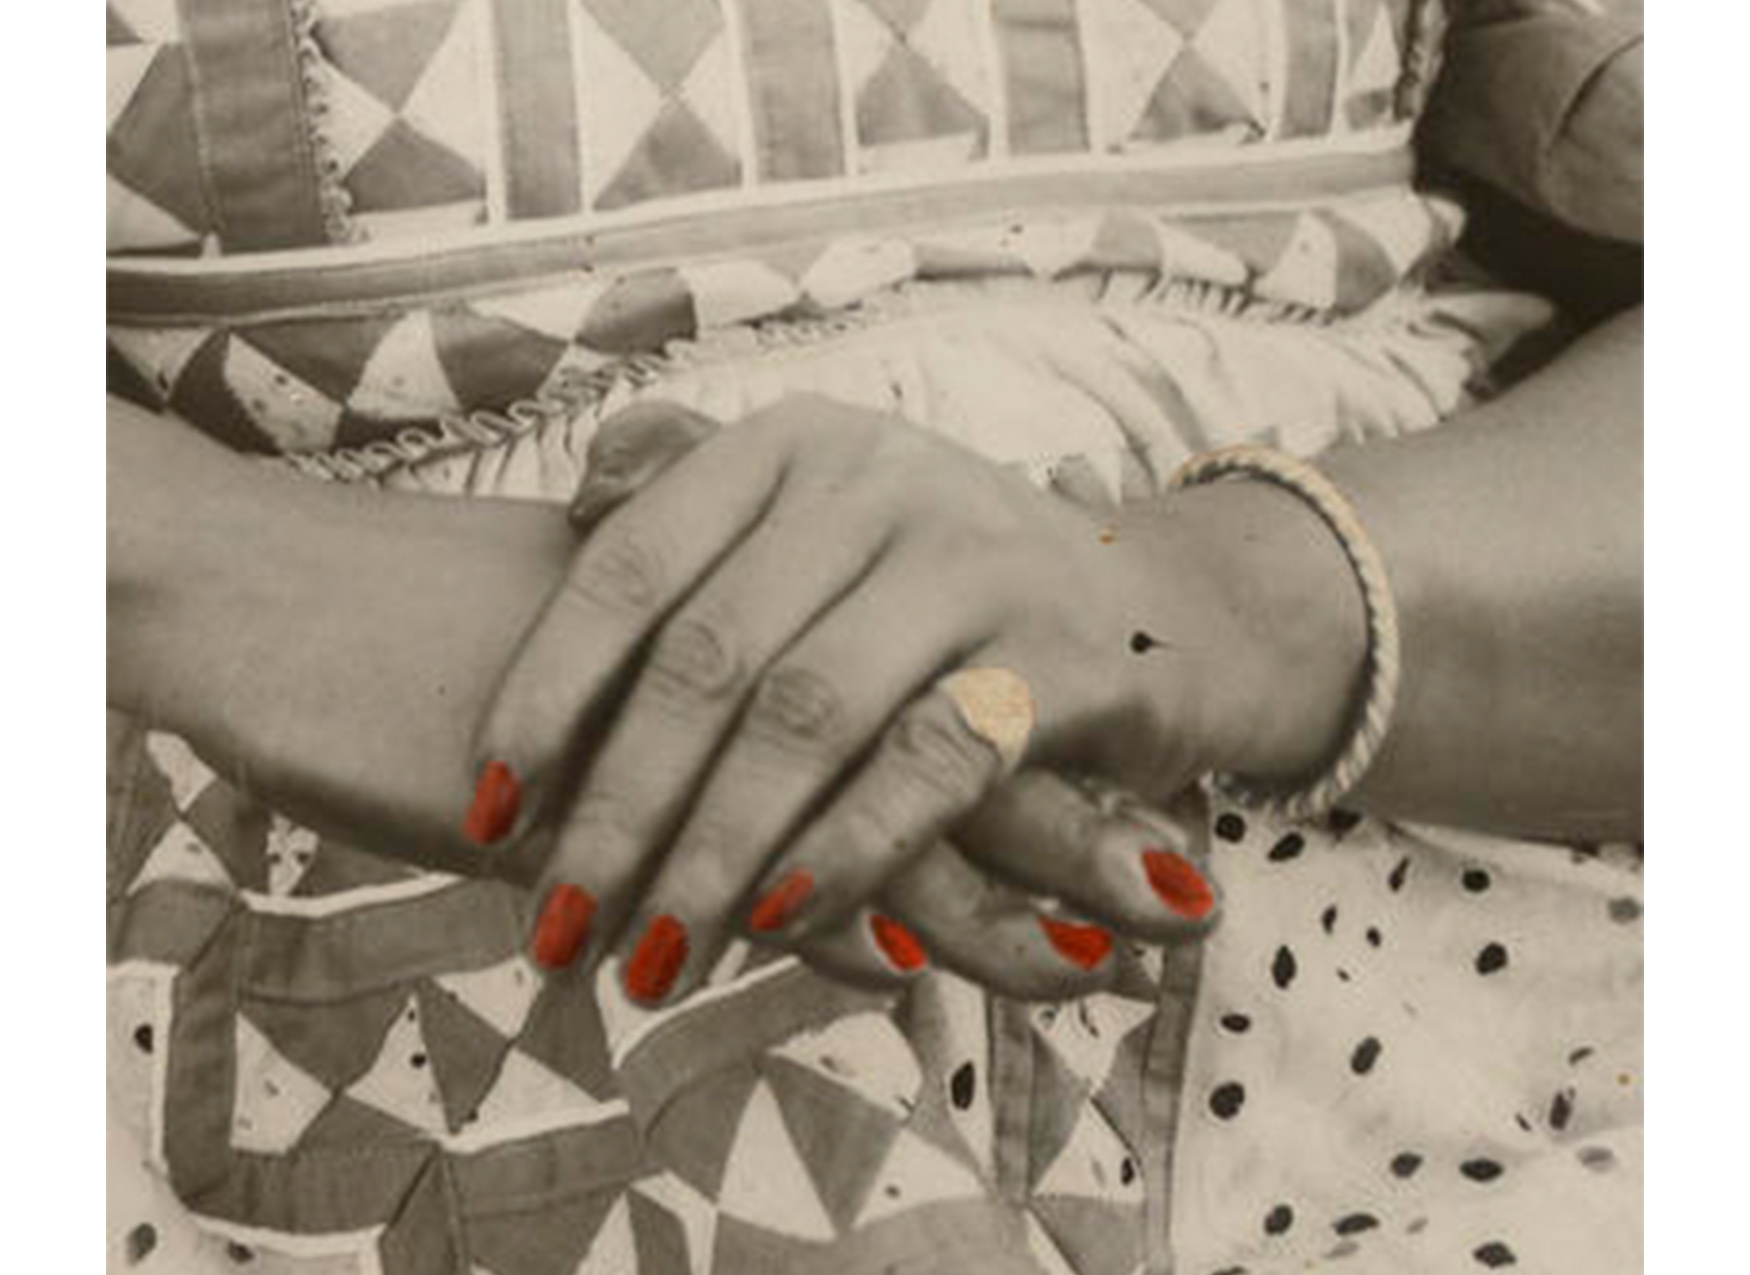 close-up of woman's hands crossed one over the other on her lap; fingernails tinted red